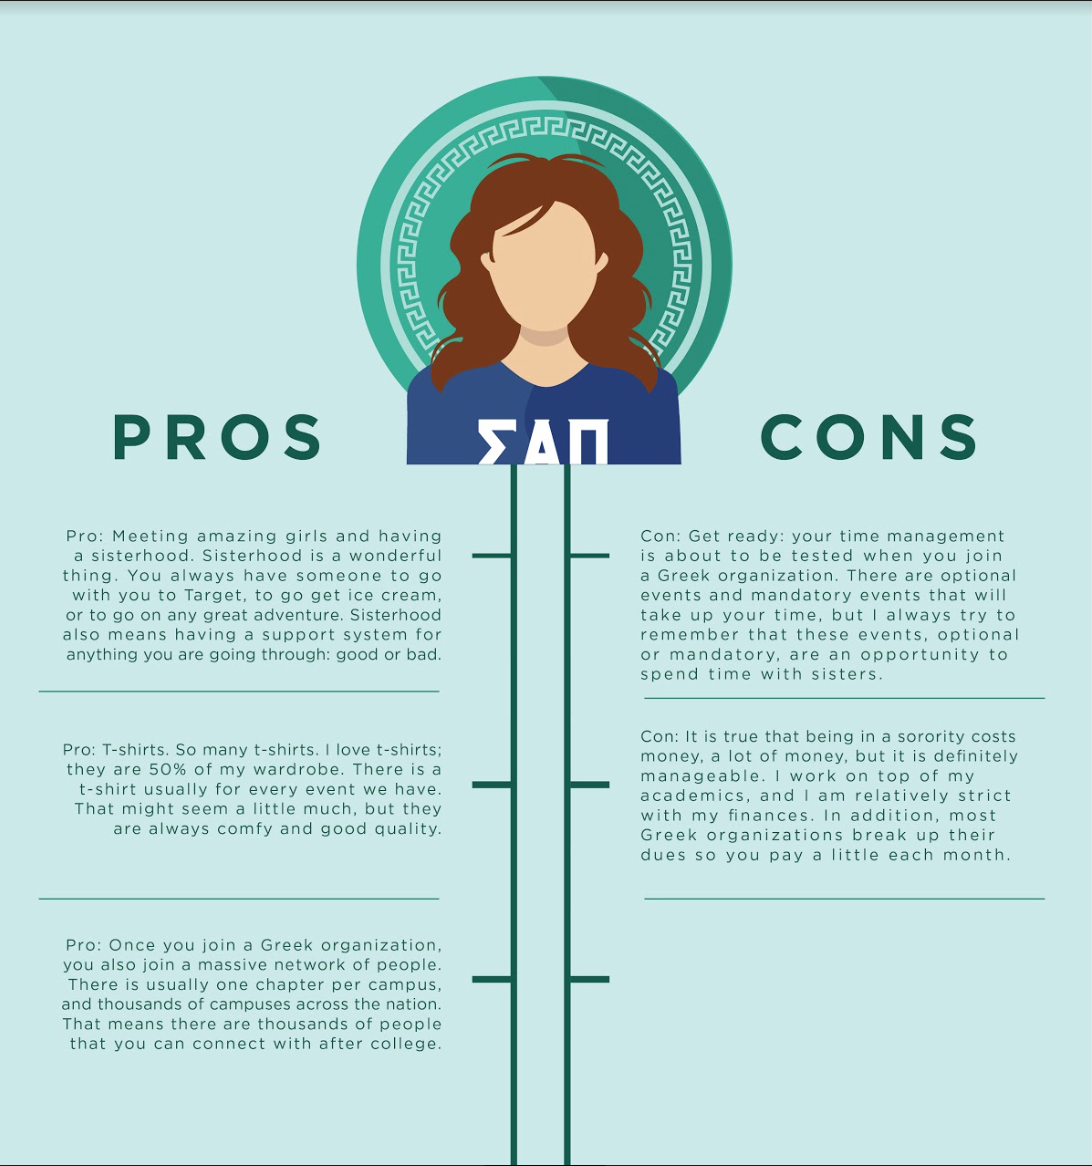 Pros and cons of going greek